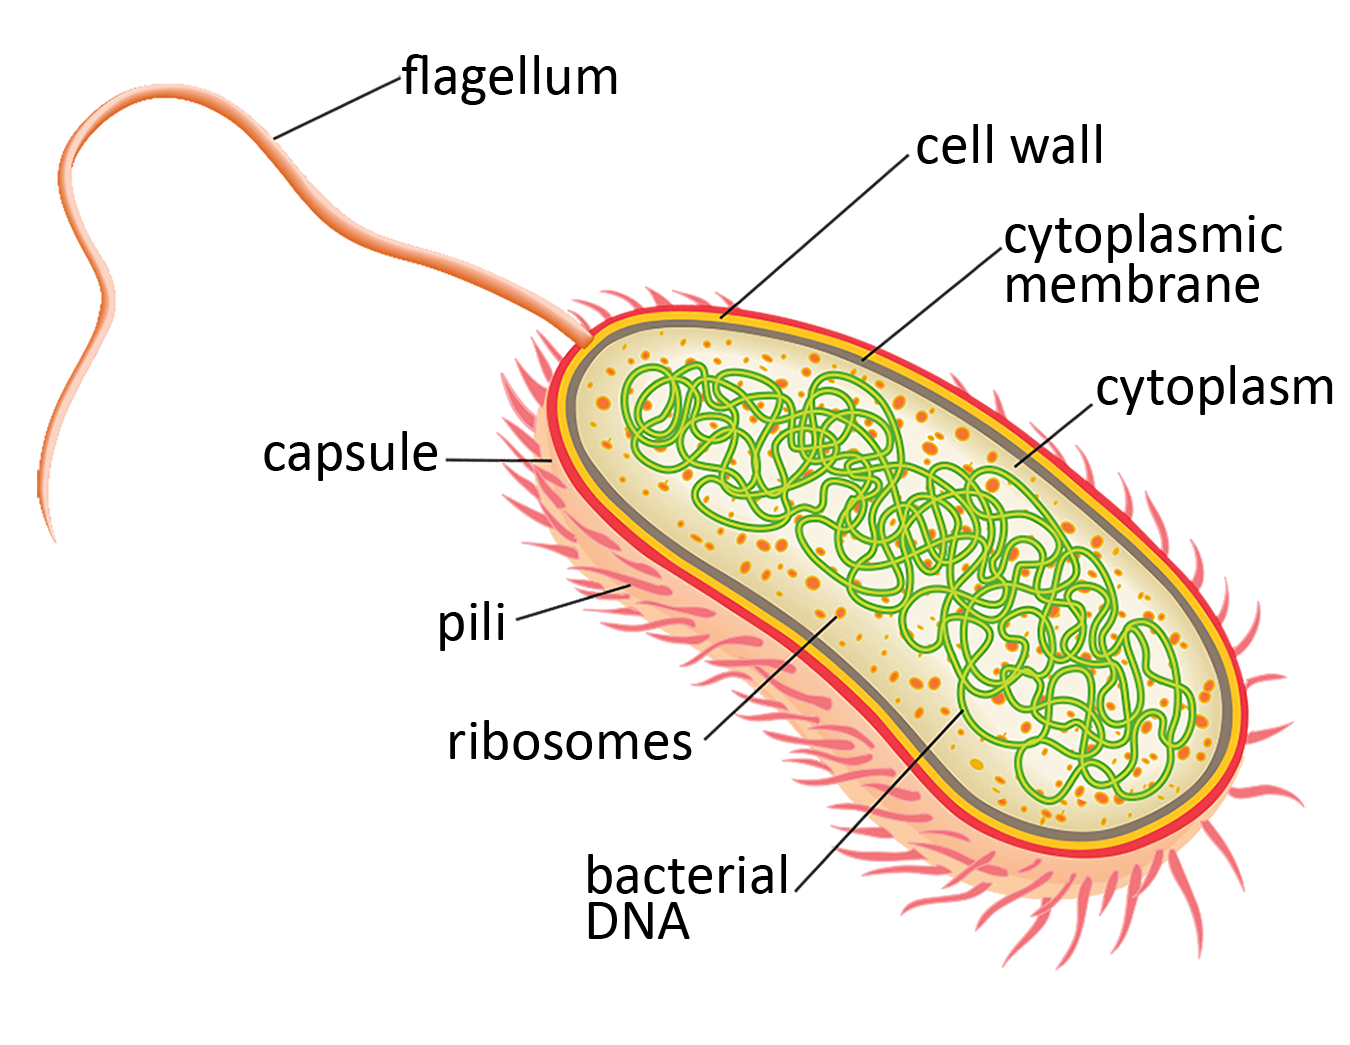 Illustration of an oval diagram with hairs protruding around the edge labeled pili and one long tail extending from one end labeled flagellum. The outside of the oval has three layers: the outide is labeled capsule and the middle is labeled cell wall and the inside is labeled cytoplasmic membrane. The medium inside the oval is labeled cytoplasm. Red dots inside the oval are labeled ribosomes and green tangled string-like structures are labeled bactierial D-N-A. 